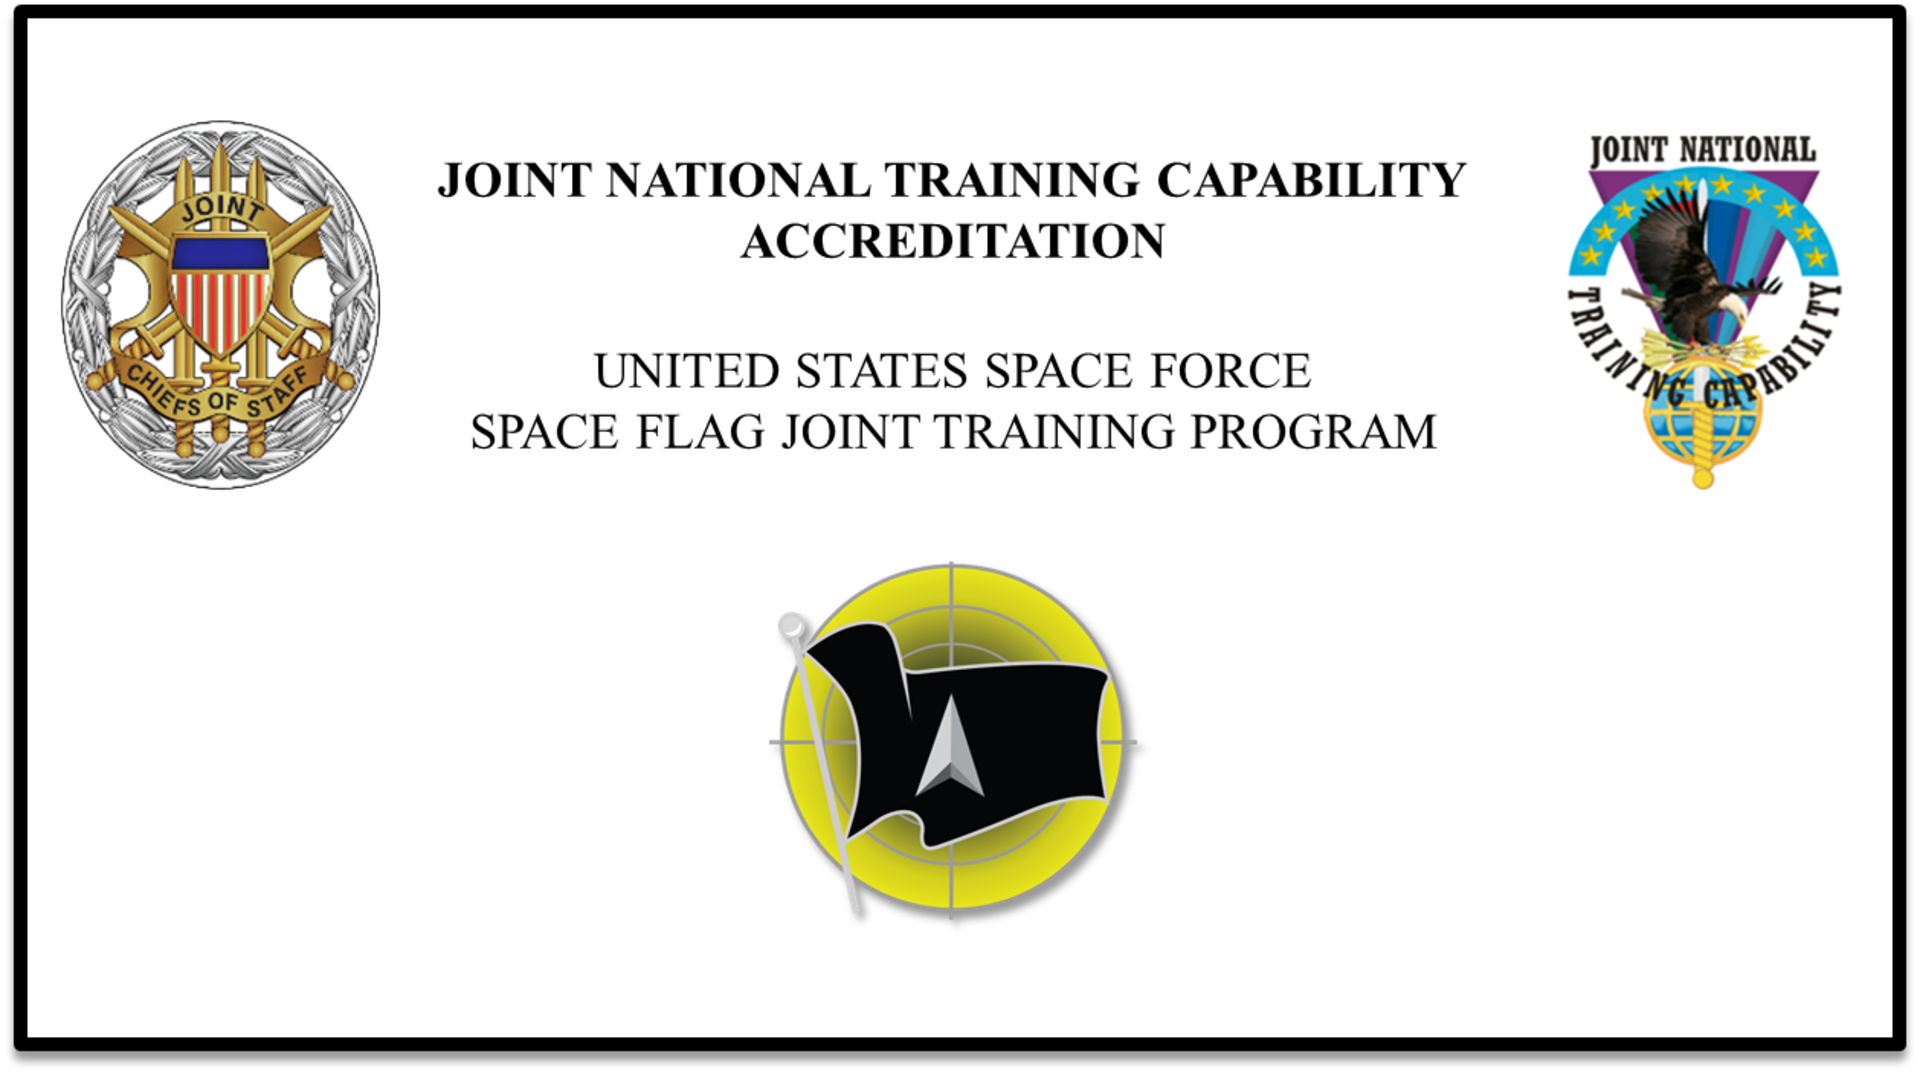 The Joint Staff affirmed the Joint National Training Capability (JNTC) Accreditation of the U.S. Space Force SPACE FLAG exercise